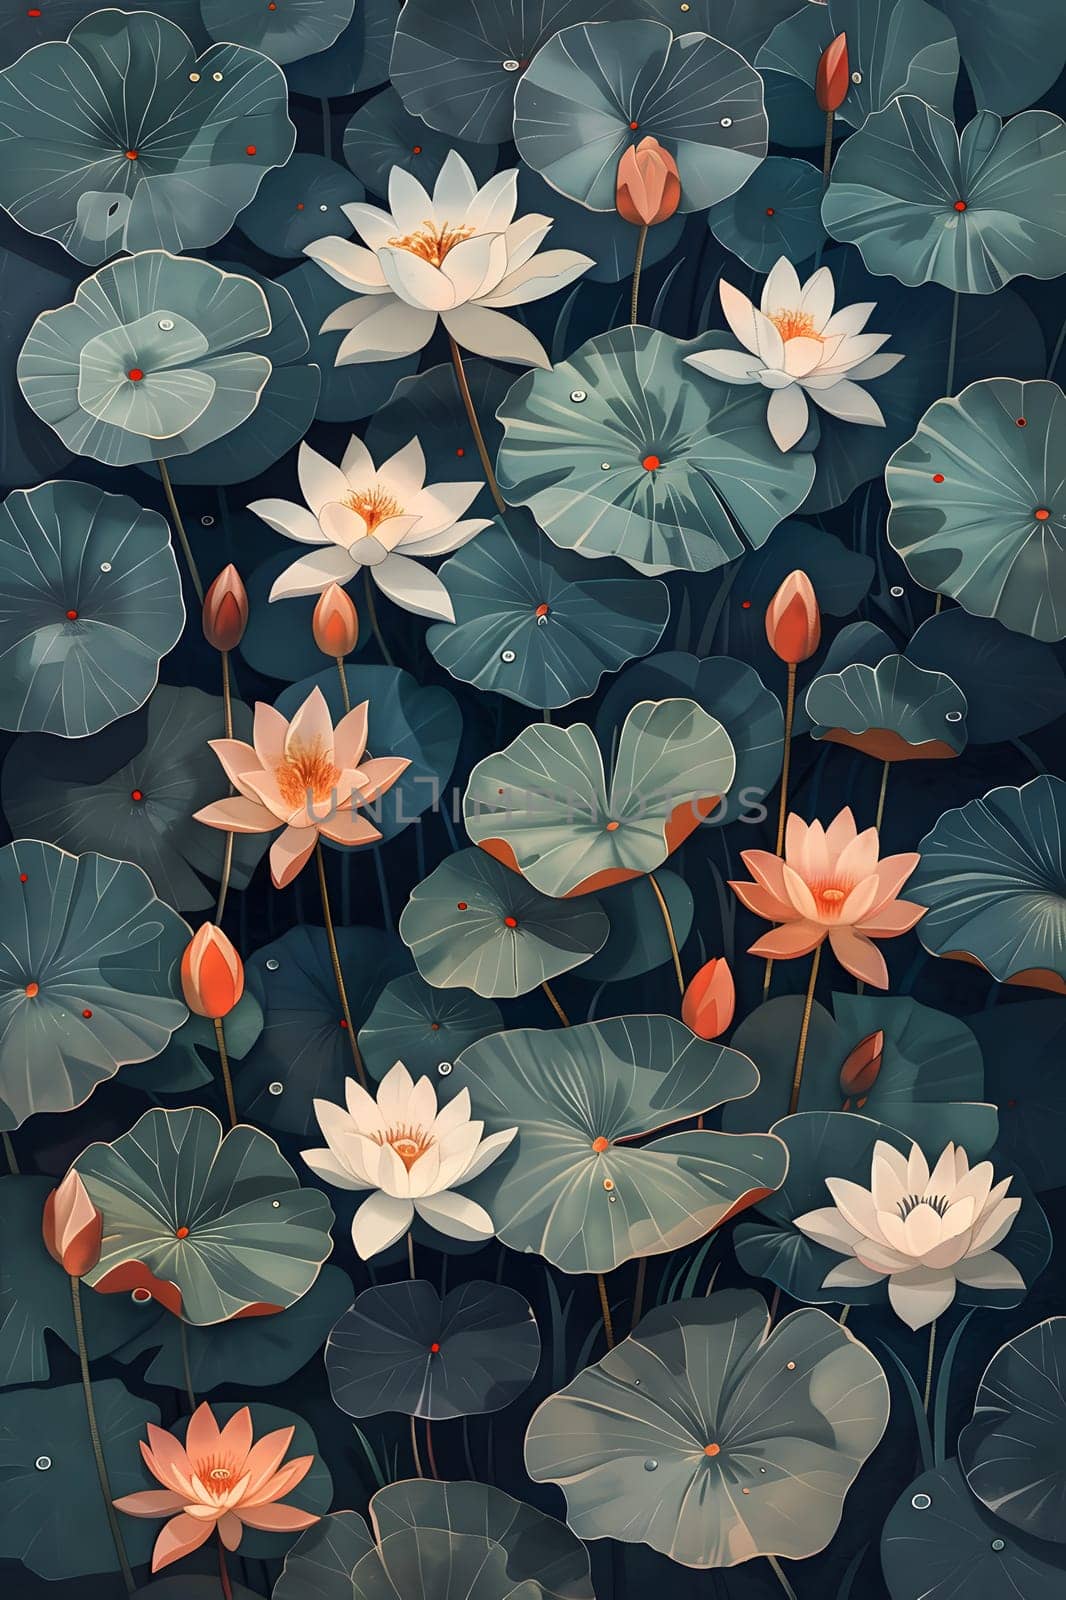 A painting of lotus flowers and lily pads in a pond by Nadtochiy